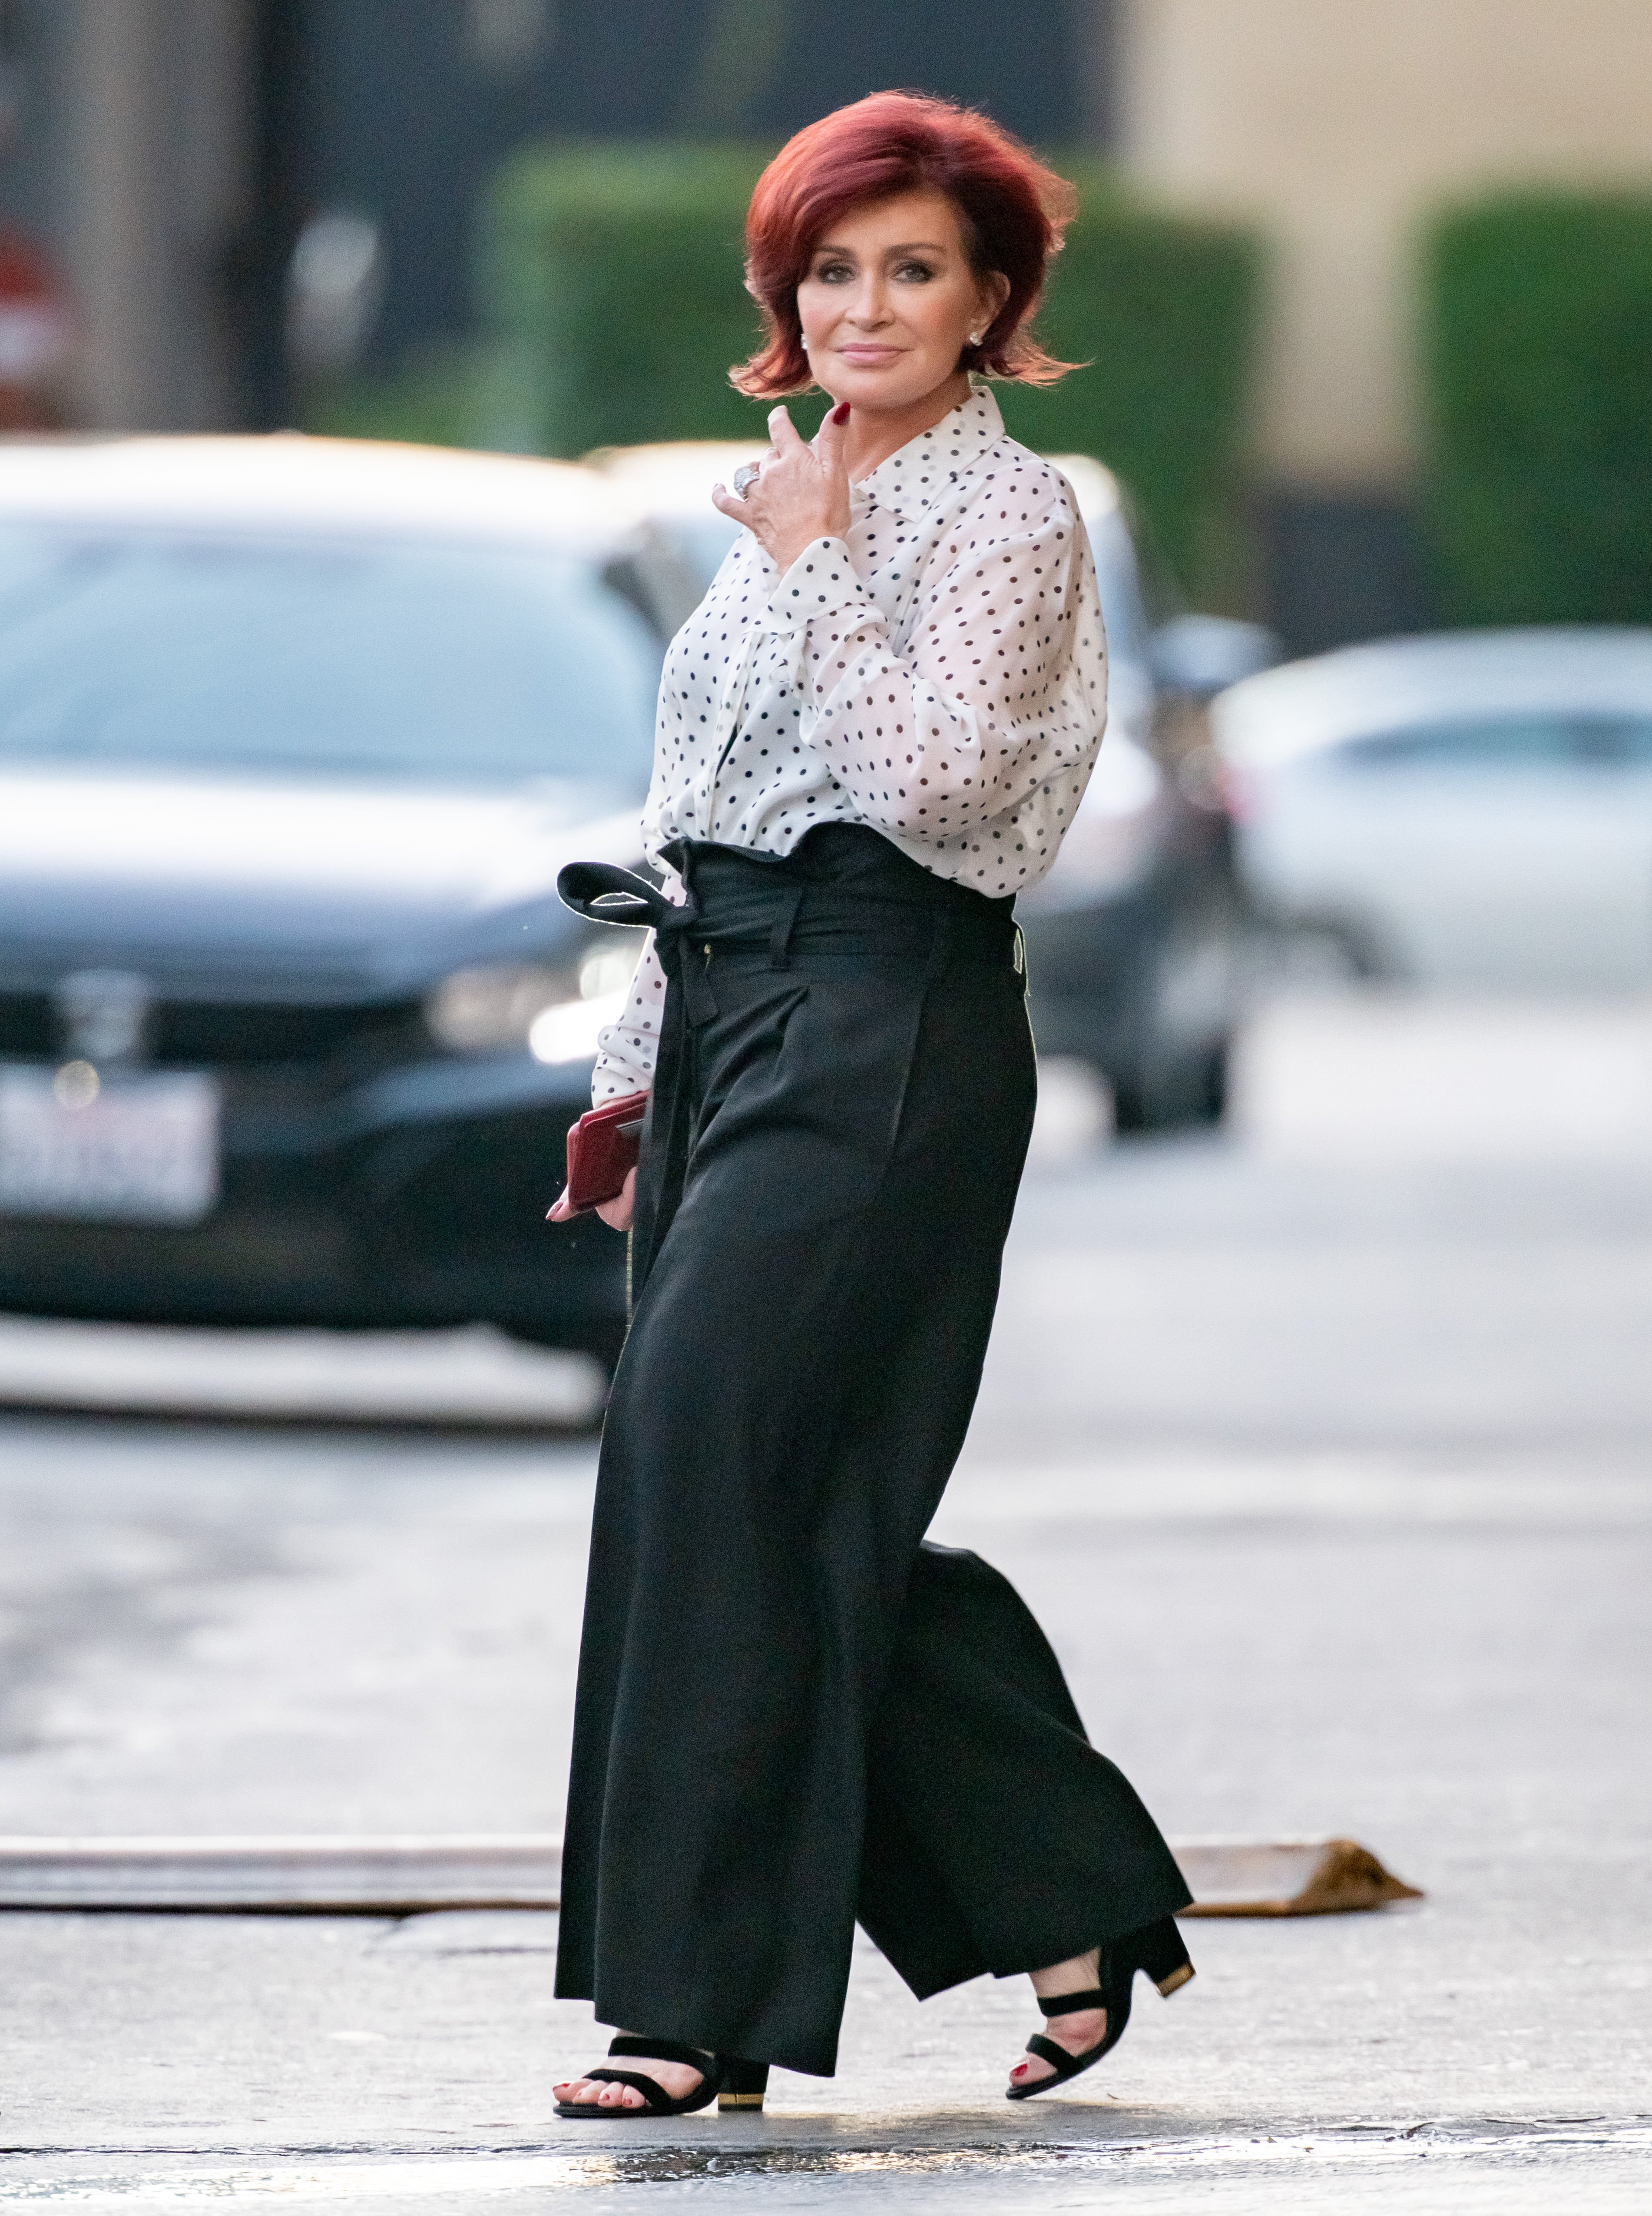 Sharon Osbourne at "Jimmy Kimmel Live" on September 11, 2019, in Los Angeles, California | Source: Getty Images